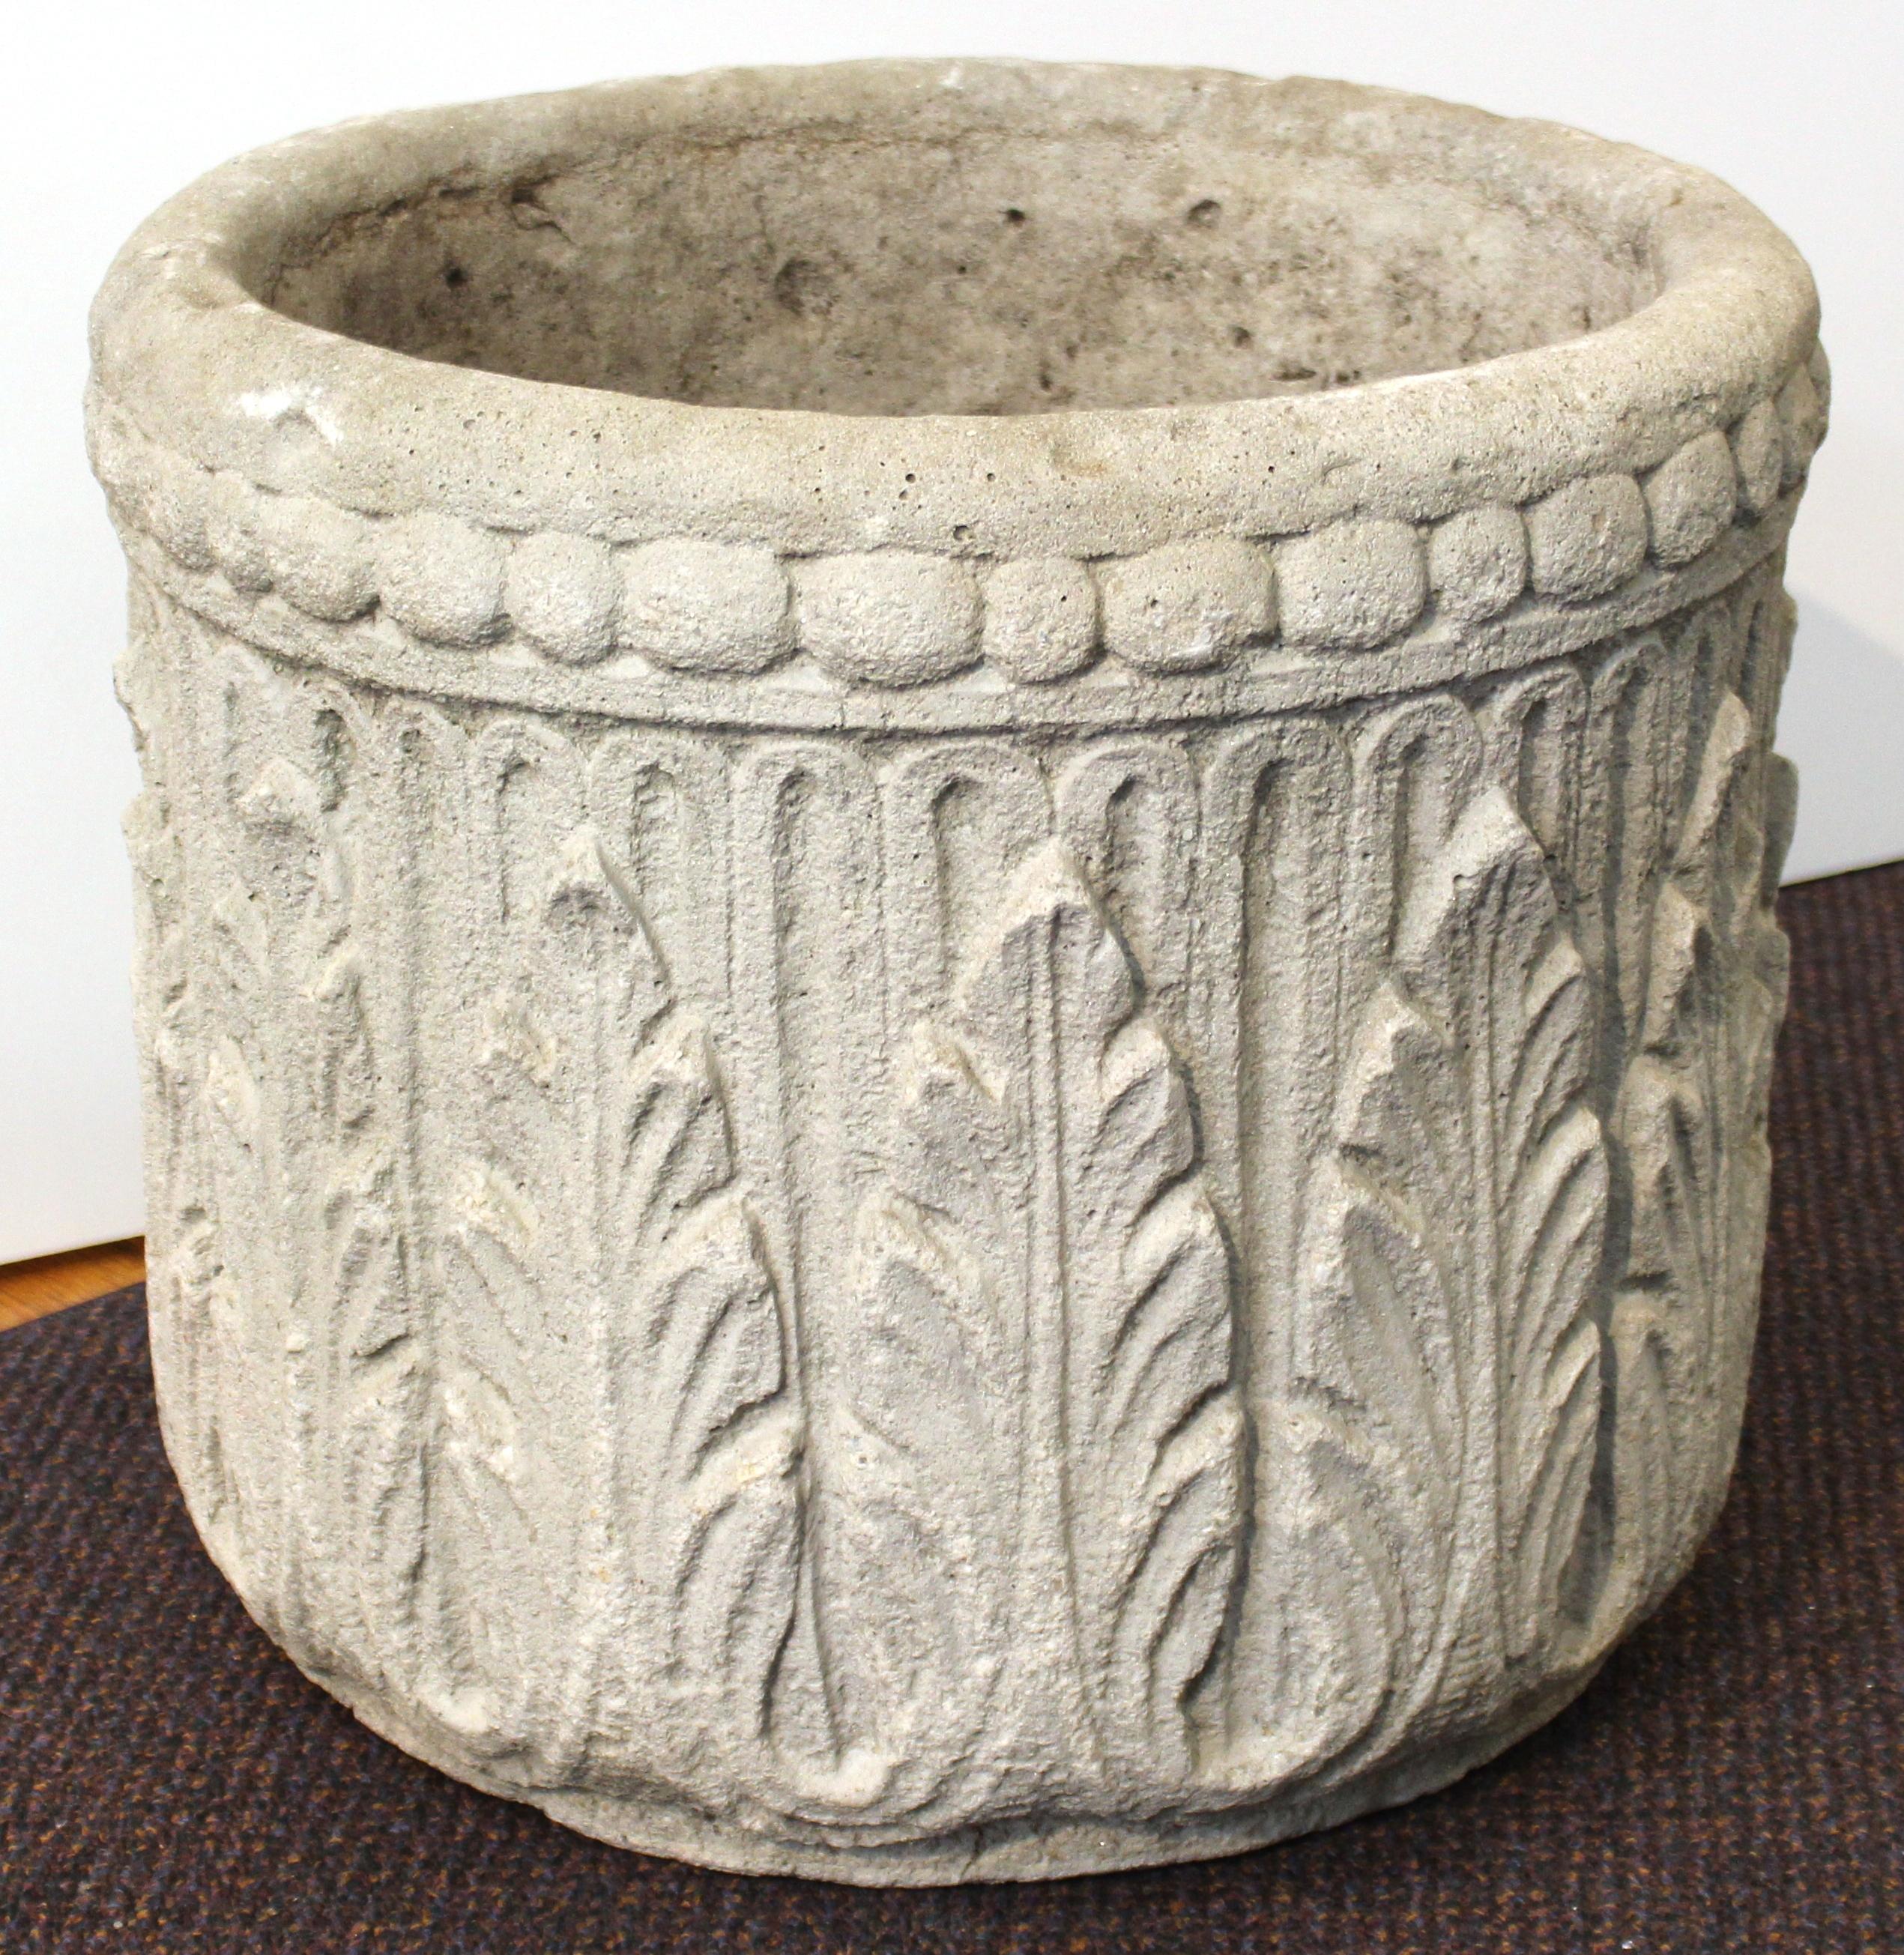 Set of four neoclassical Revival style garden planters made of concrete. The set consists of three larger planters with stylized acanthus leave decor and one smaller planter with a basket weave design. The set is in great vintage condition with